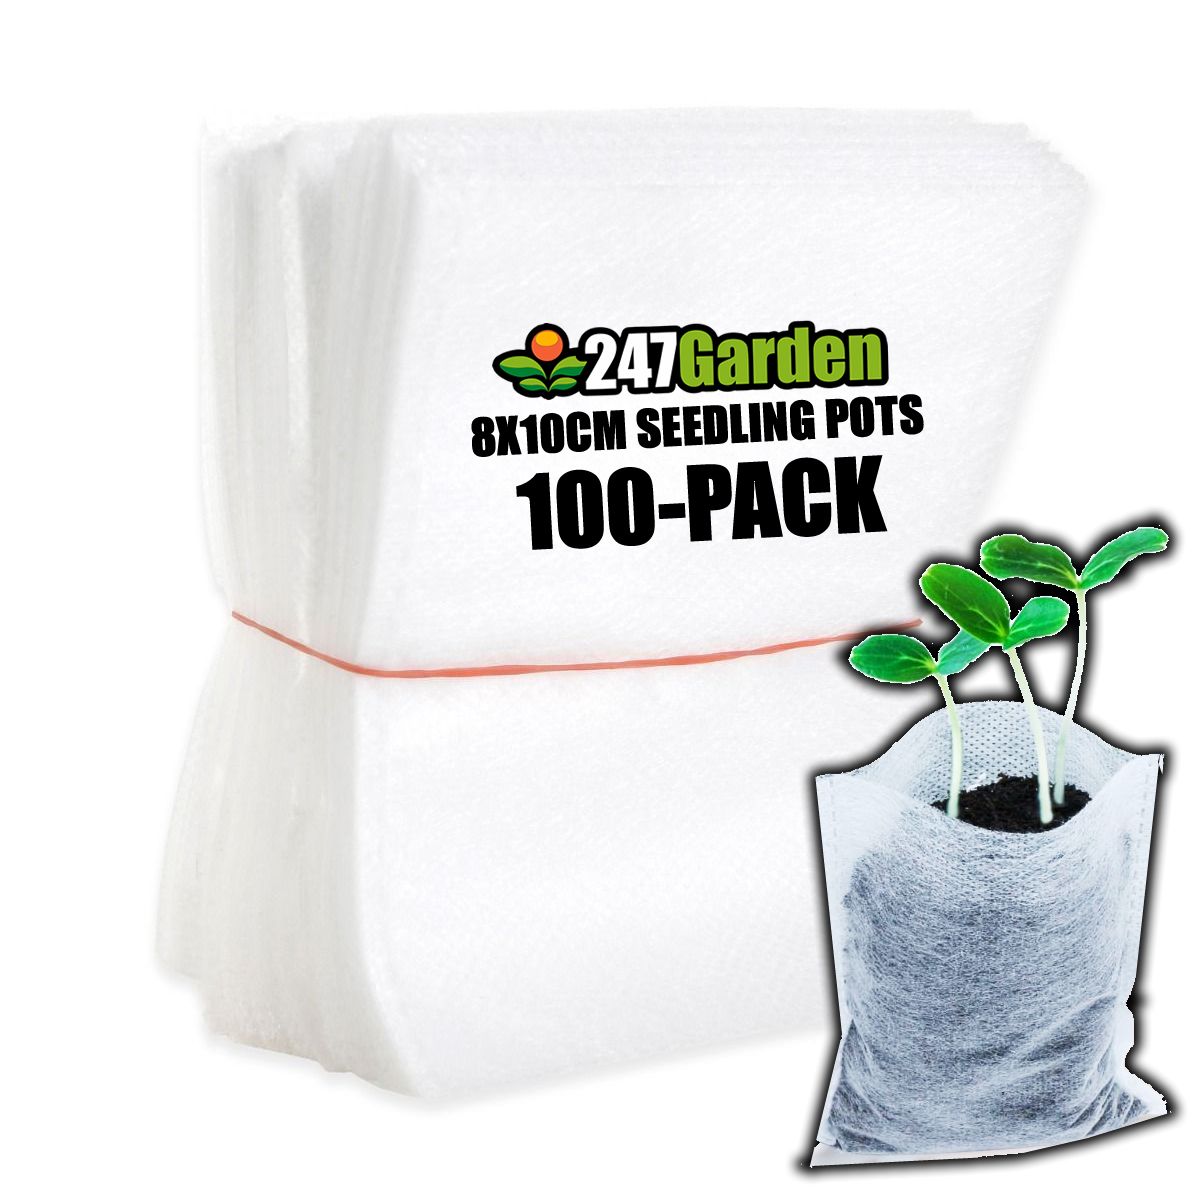 What are the Advantages of Nonwoven Grow Bags for gardening? – Cocoyard  Garden Supply